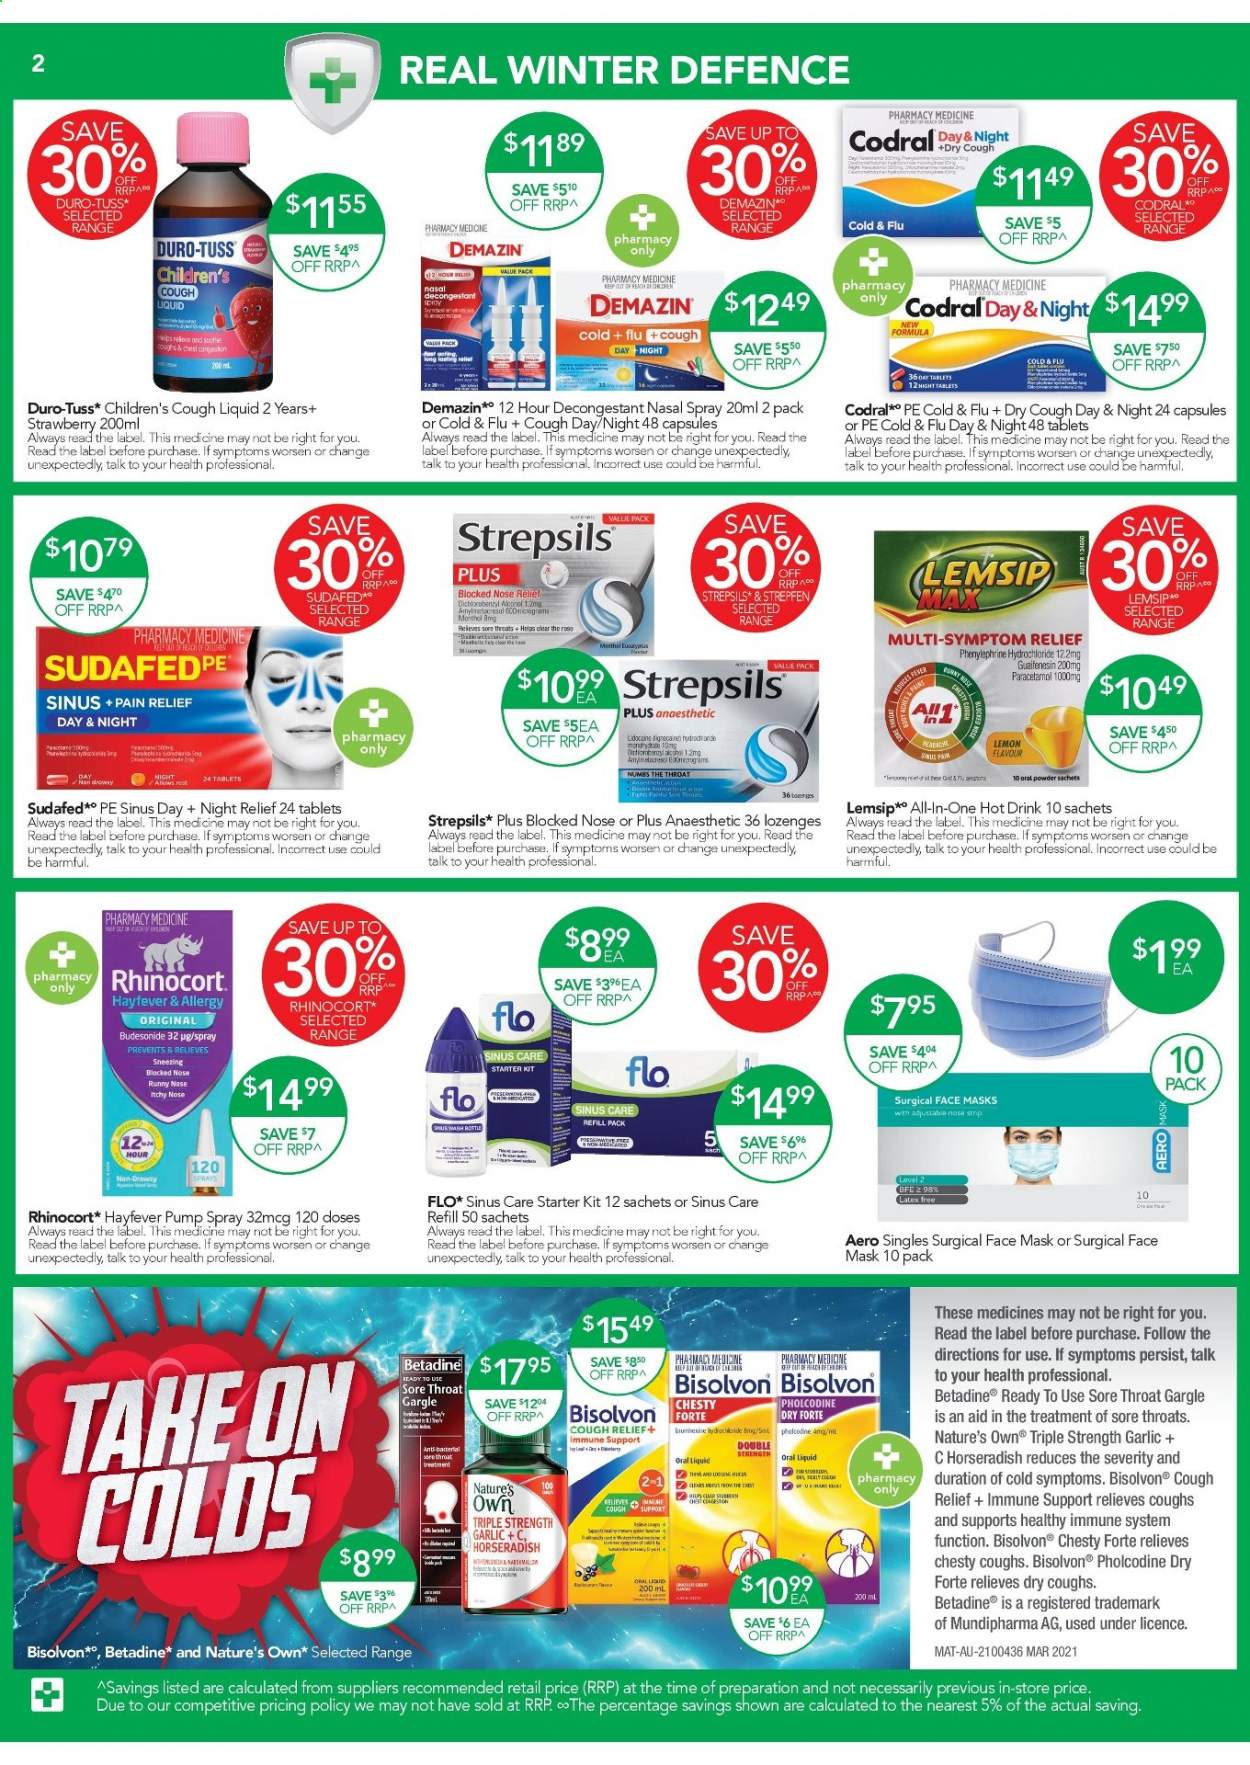 thumbnail - TerryWhite Chemmart Catalogue - 27 May 2021 - 15 Jun 2021 - Sales products - Crest, face mask, pain relief, Cold & Flu, Sudafed, horseradish, Betadine, Nature's Own, Strepsils, nasal spray, Codral. Page 2.